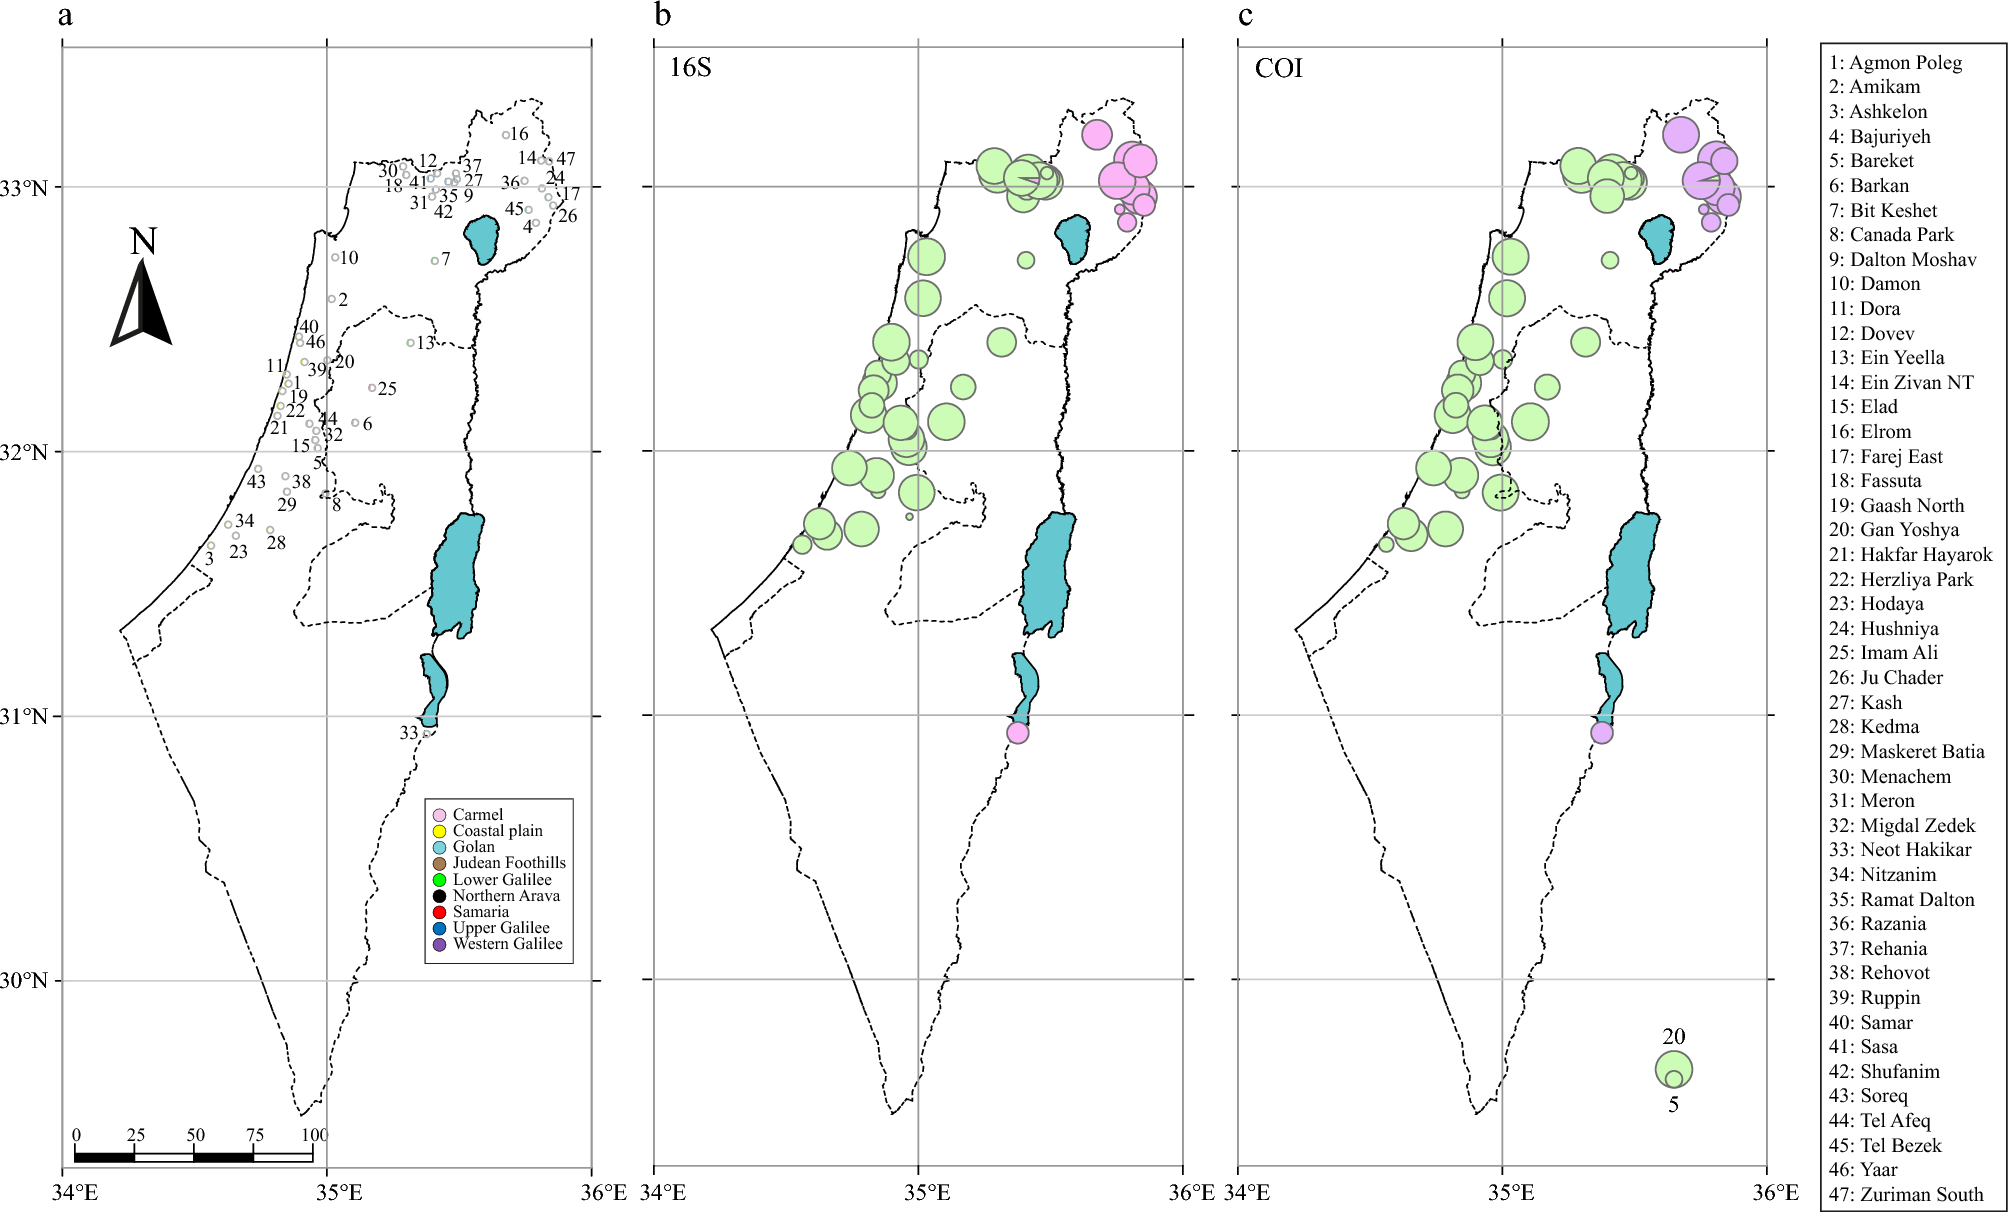 The phylogeography of Middle Eastern tree frogs in Israel